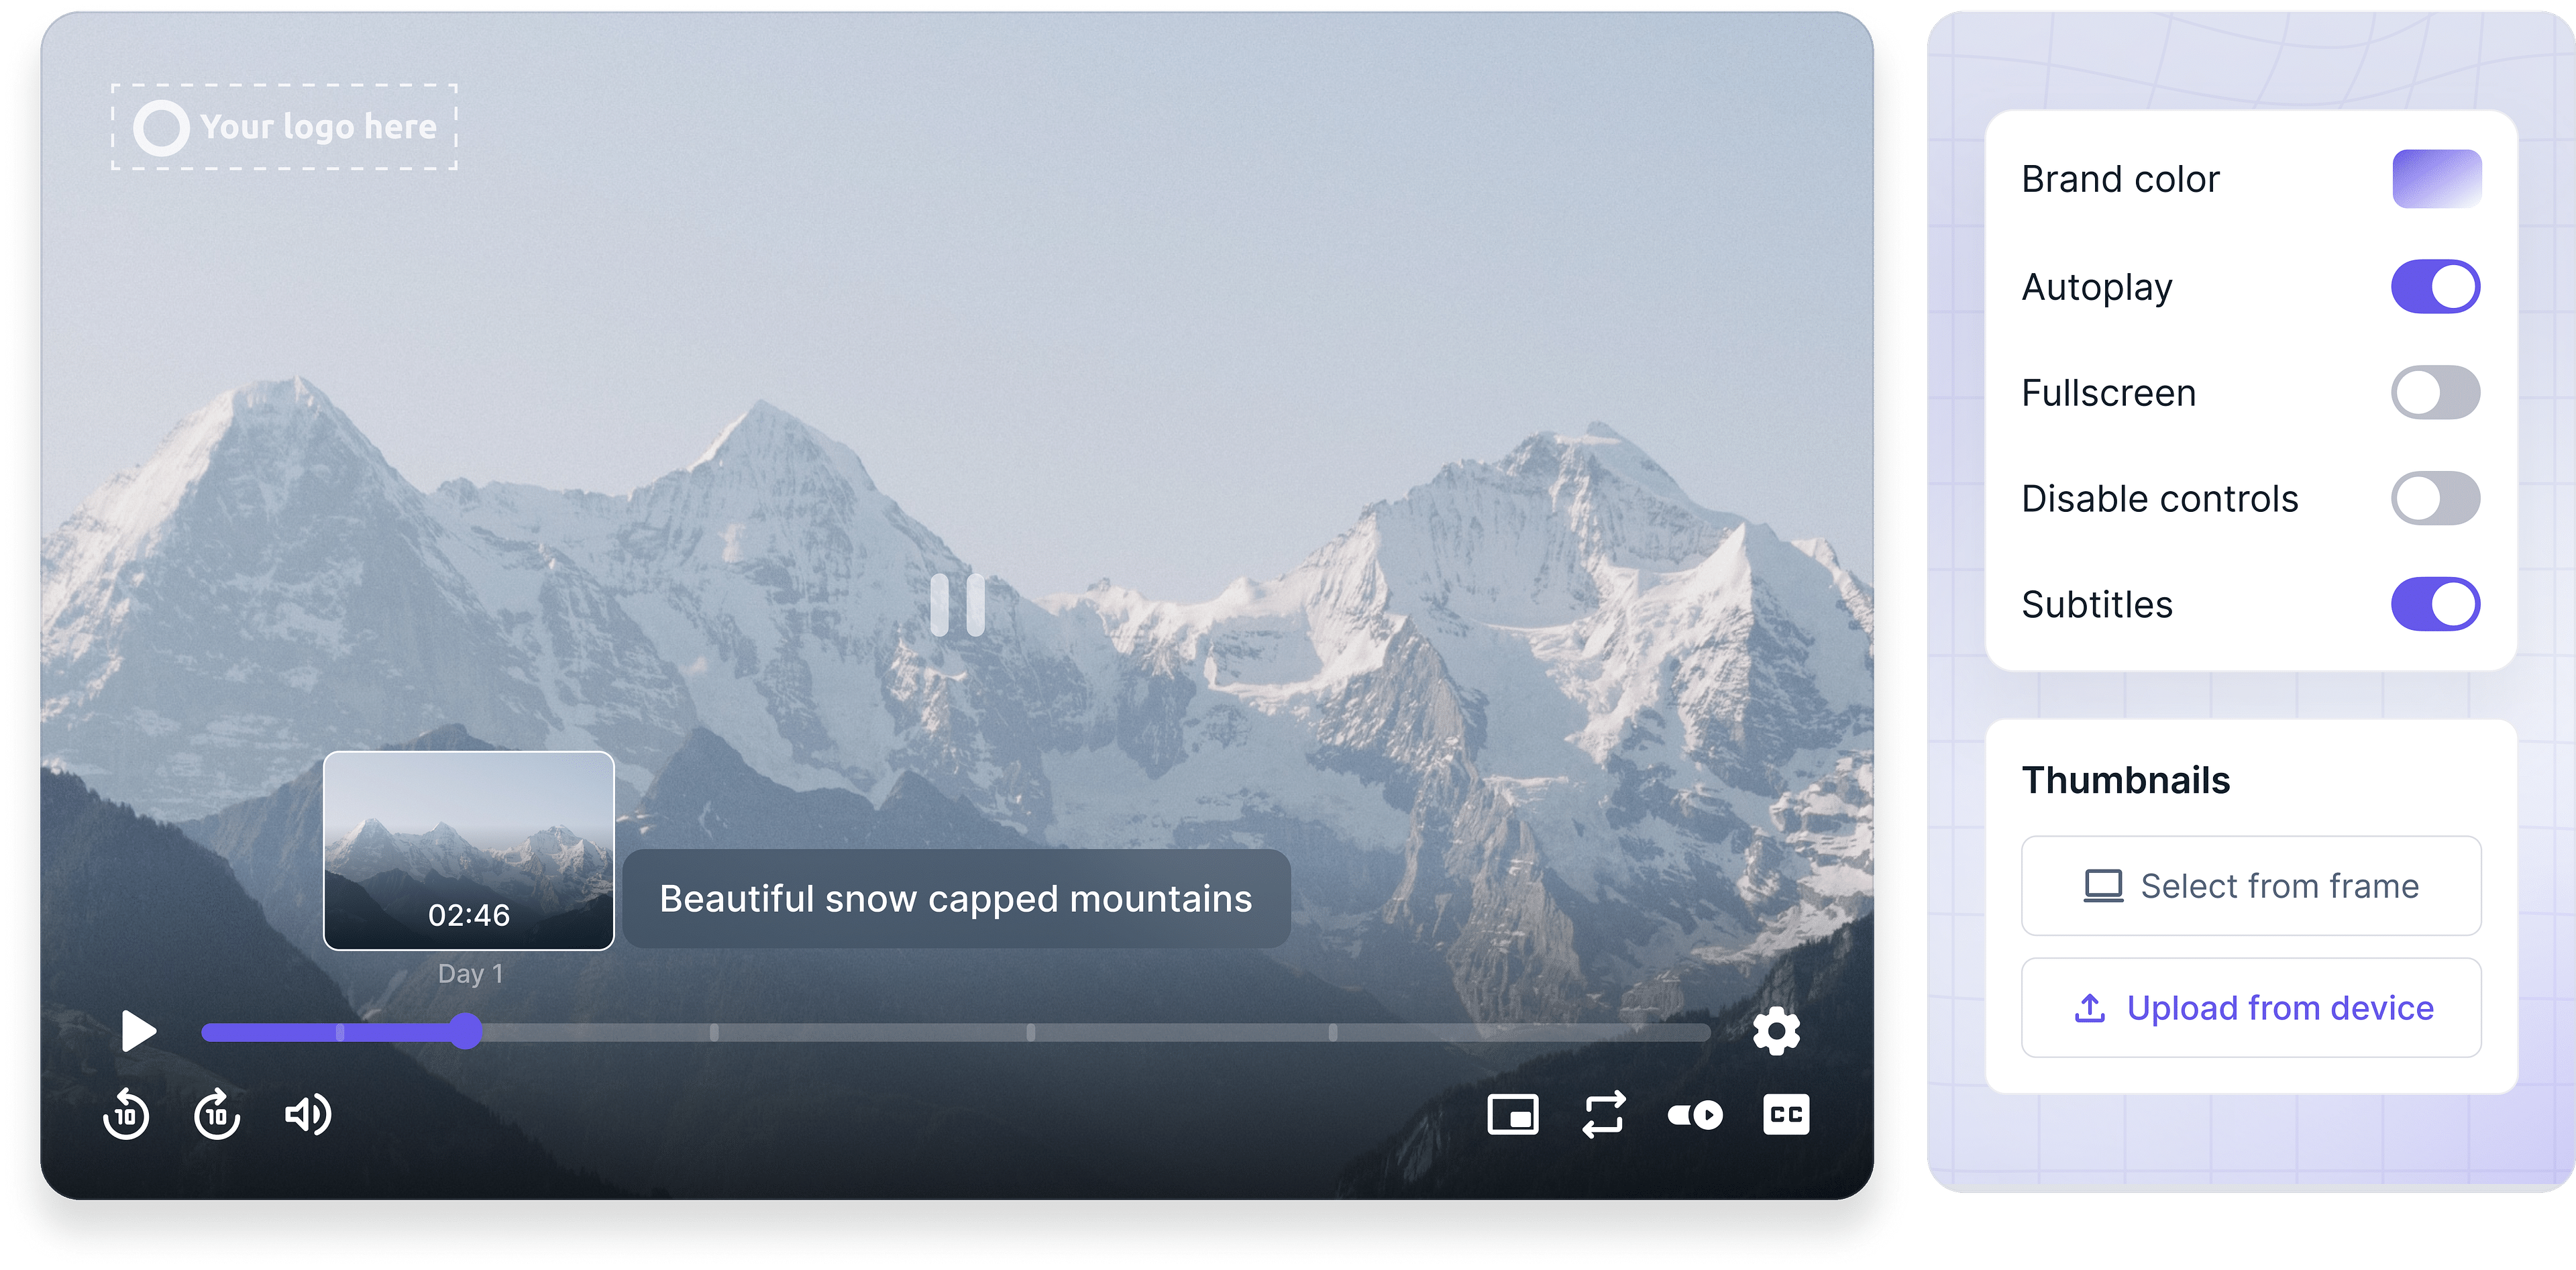 Customizable video player with Gumlet lets you customize, add subtitles and custom thumbnails.

